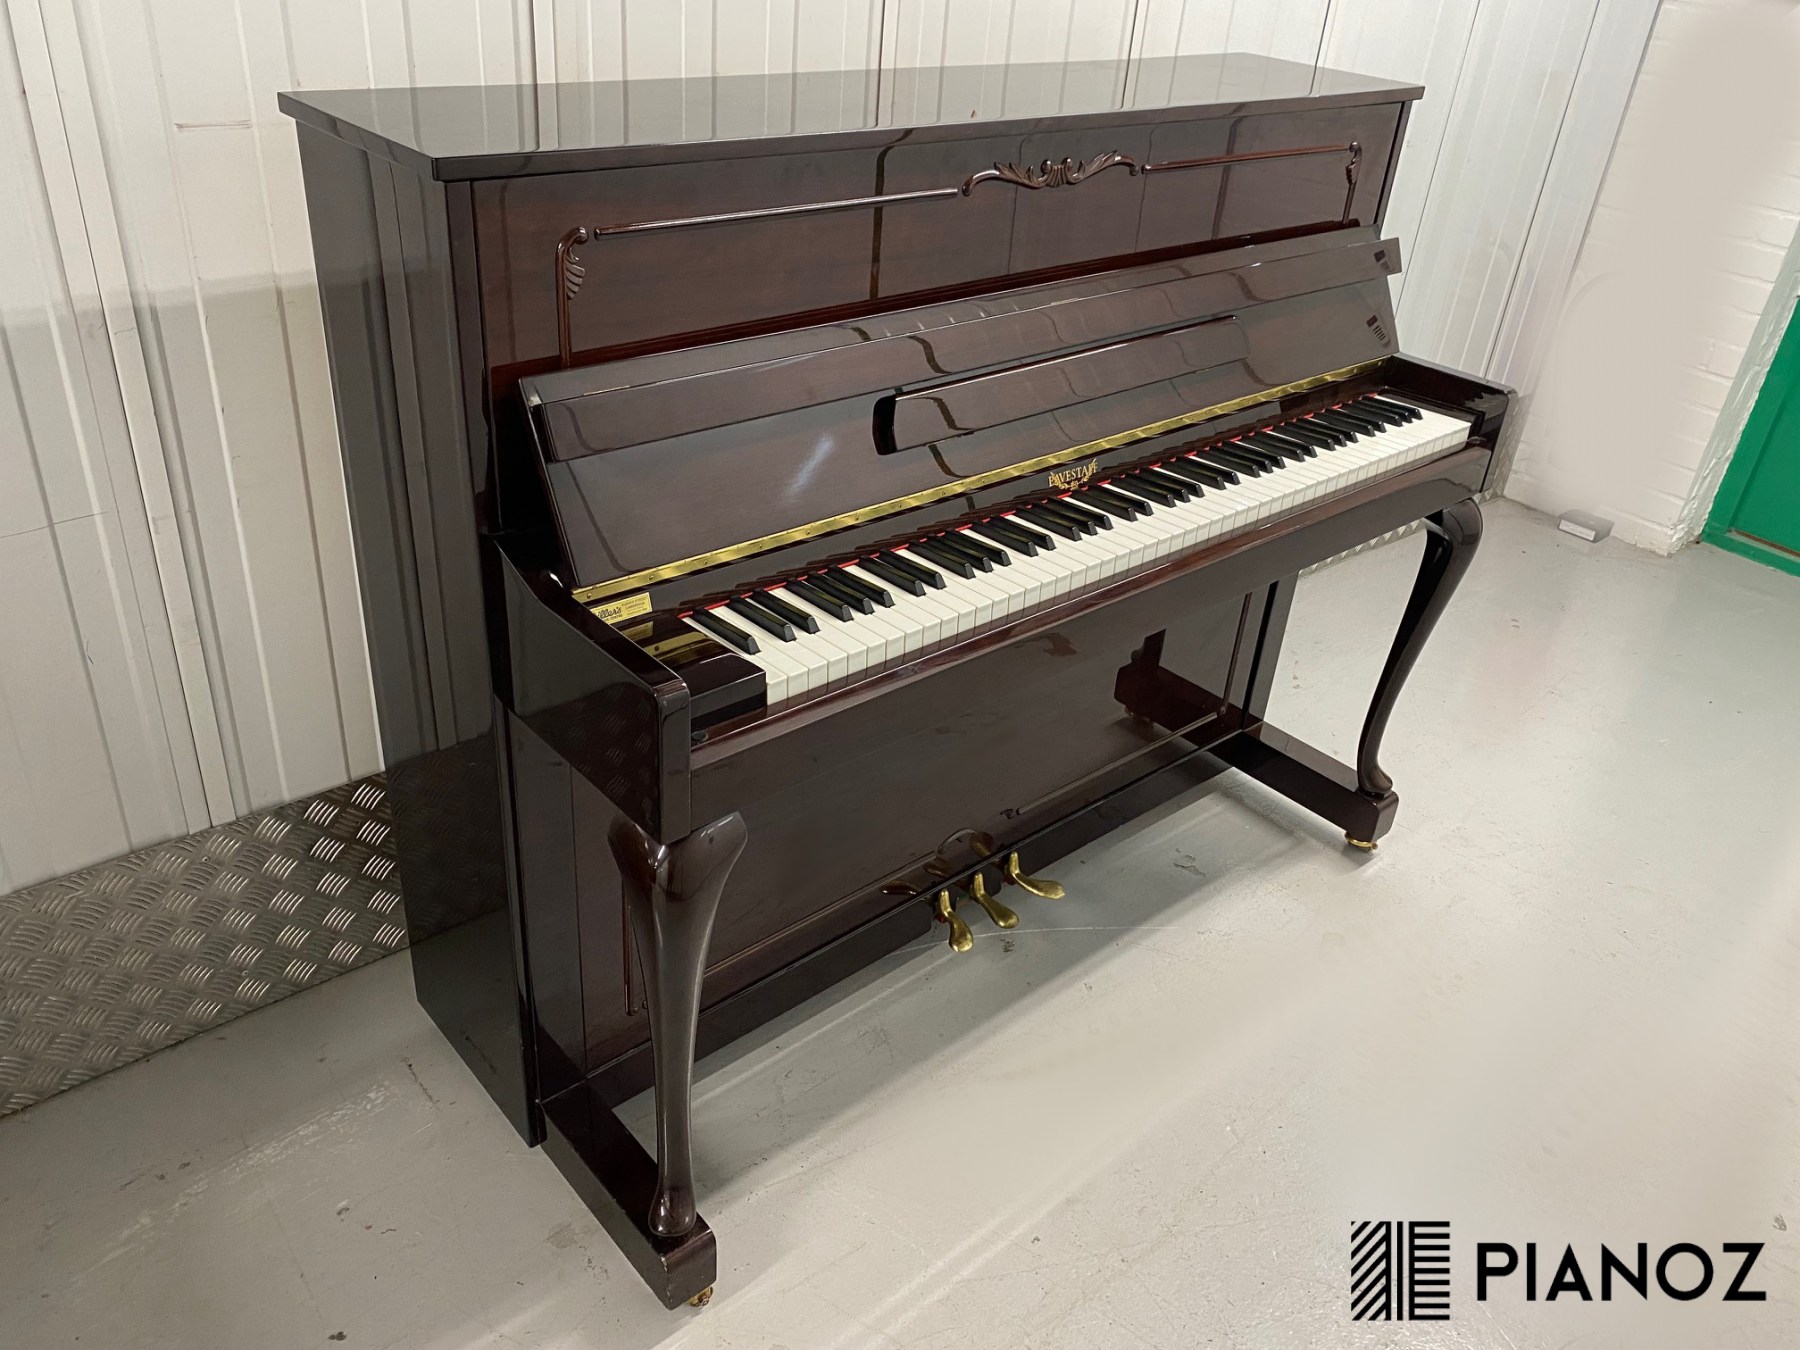 Eavestaff 110 Upright Piano piano for sale in UK